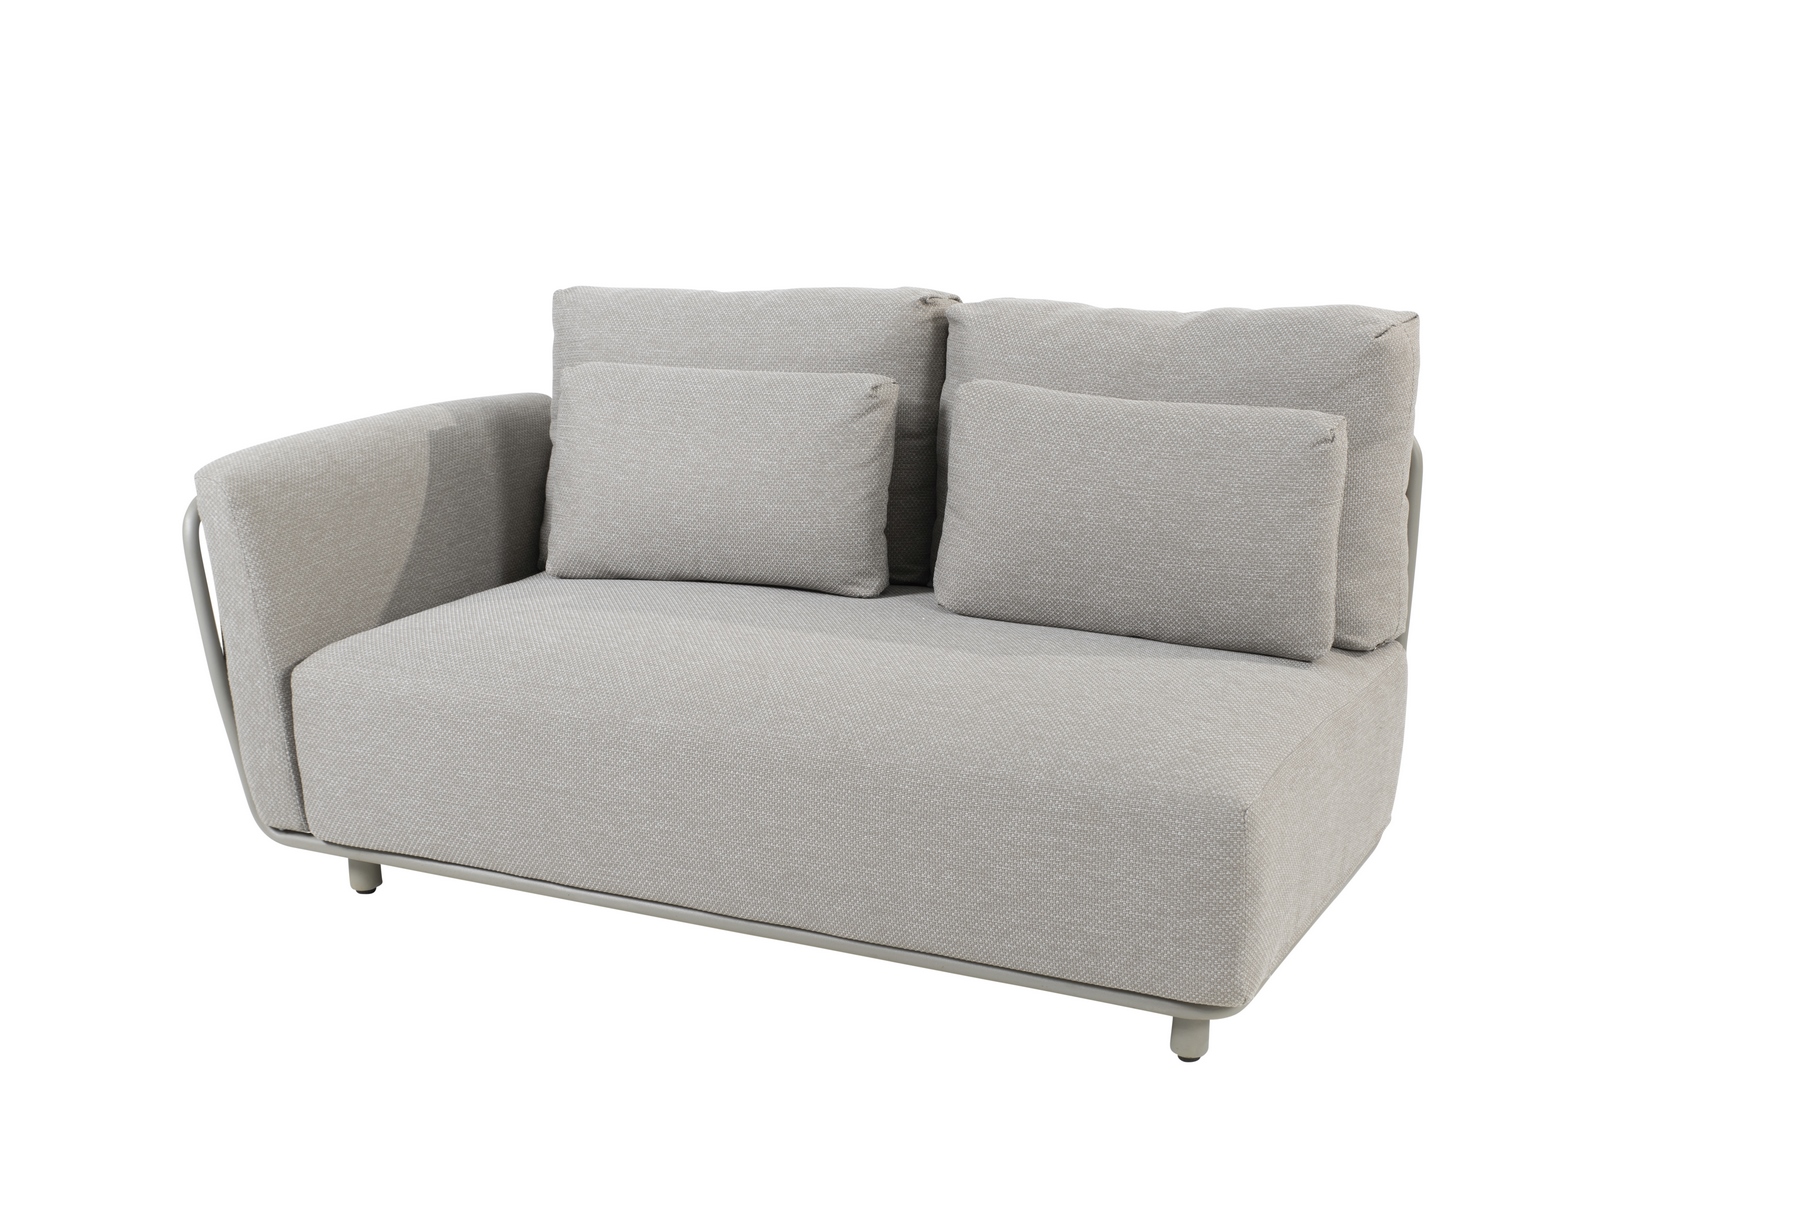 213900__Evolve_2_seater_right_grey_metalic_with_6_cushions_01.jpg